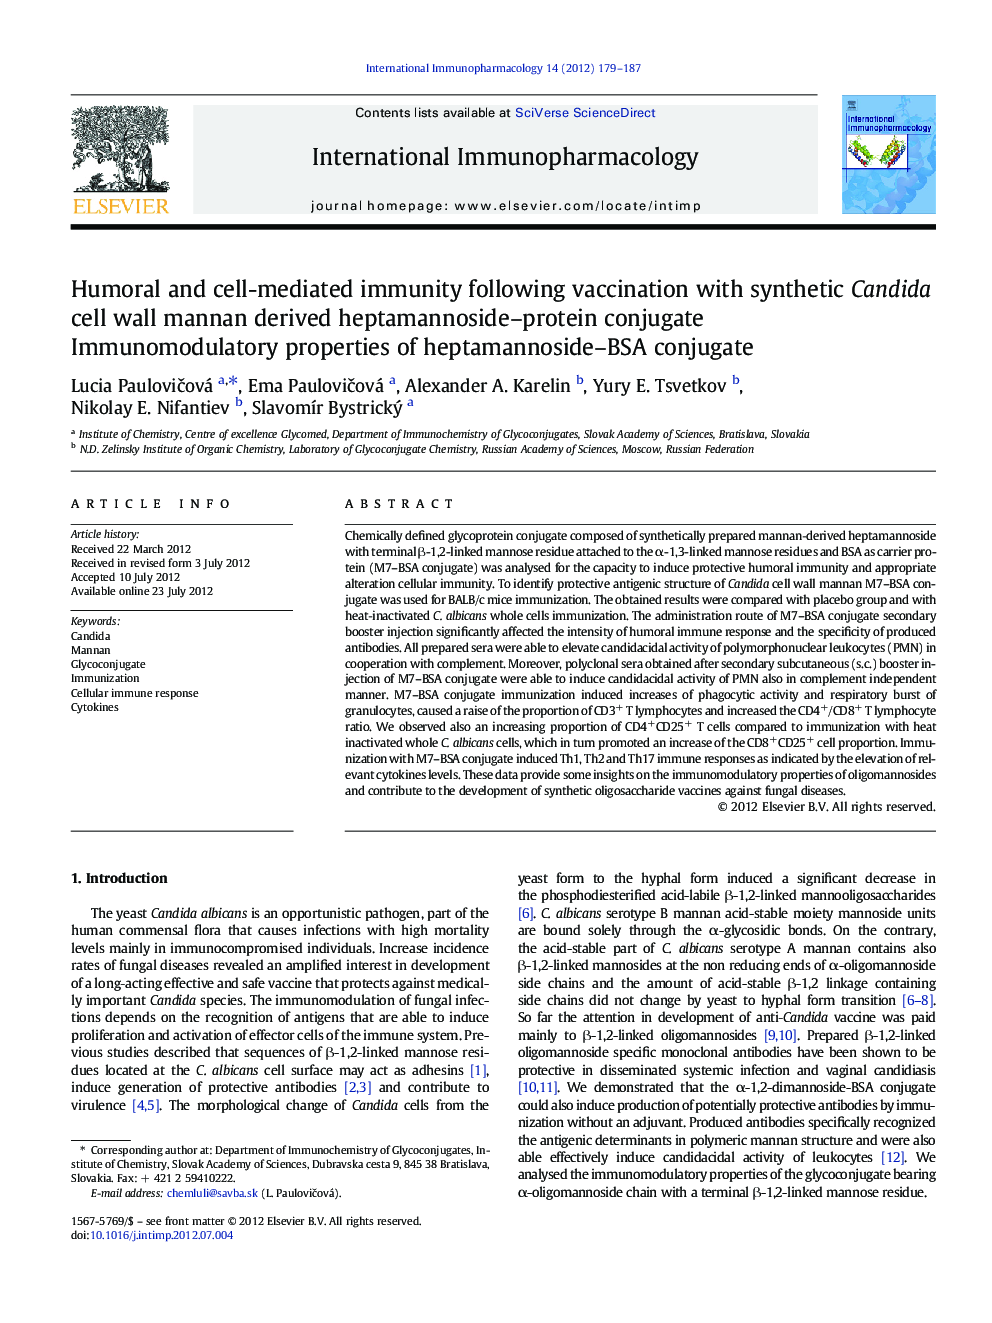 Humoral and cell-mediated immunity following vaccination with synthetic Candida cell wall mannan derived heptamannoside-protein conjugate: Immunomodulatory properties of heptamannoside-BSA conjugate